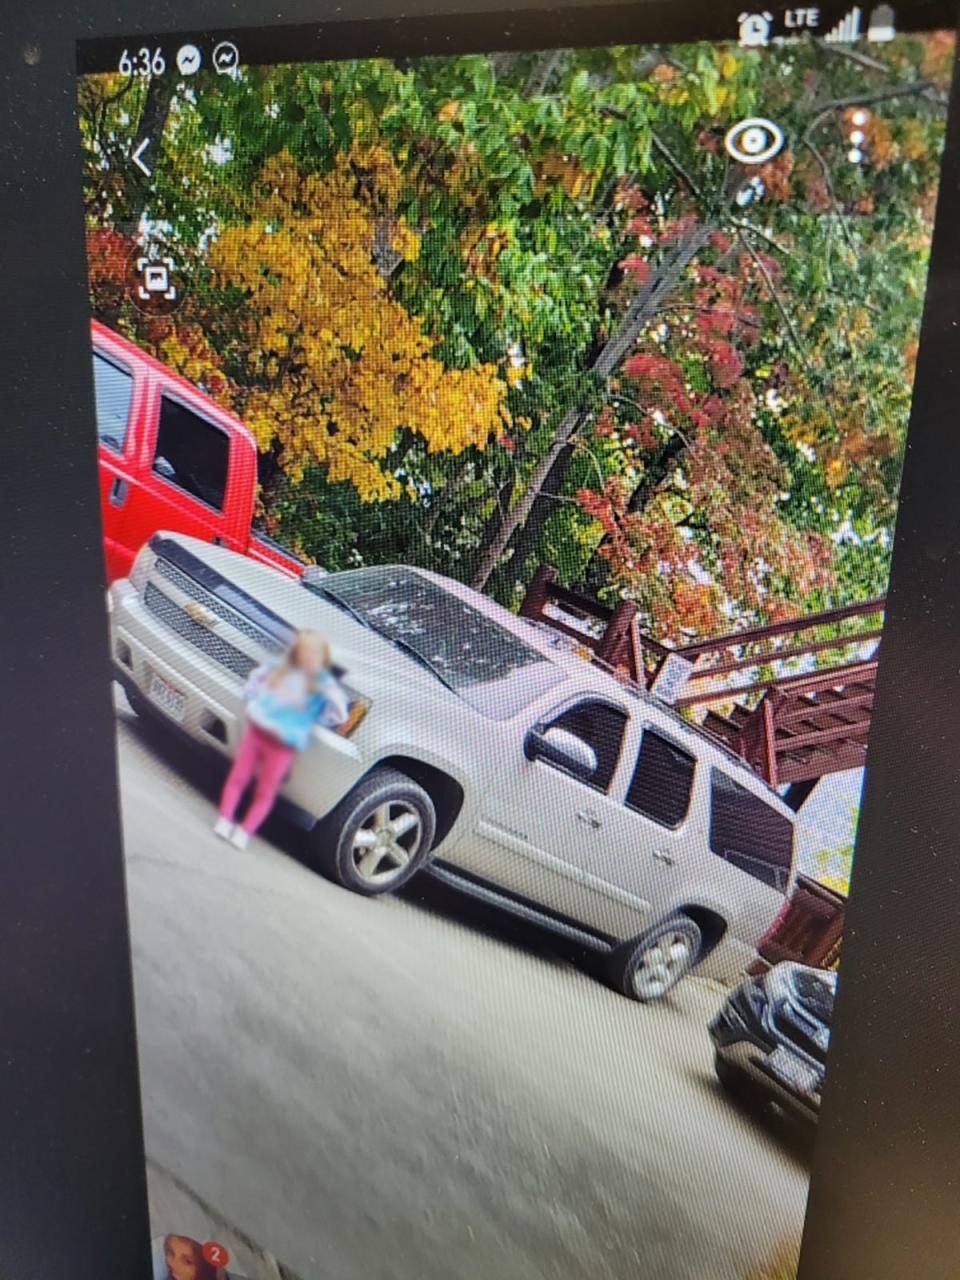 An amber alert has been issued for two boys who were in the pictured vehicle, which was stolen in downtown Zanesville. A child unrelated to the case has been blurred out.